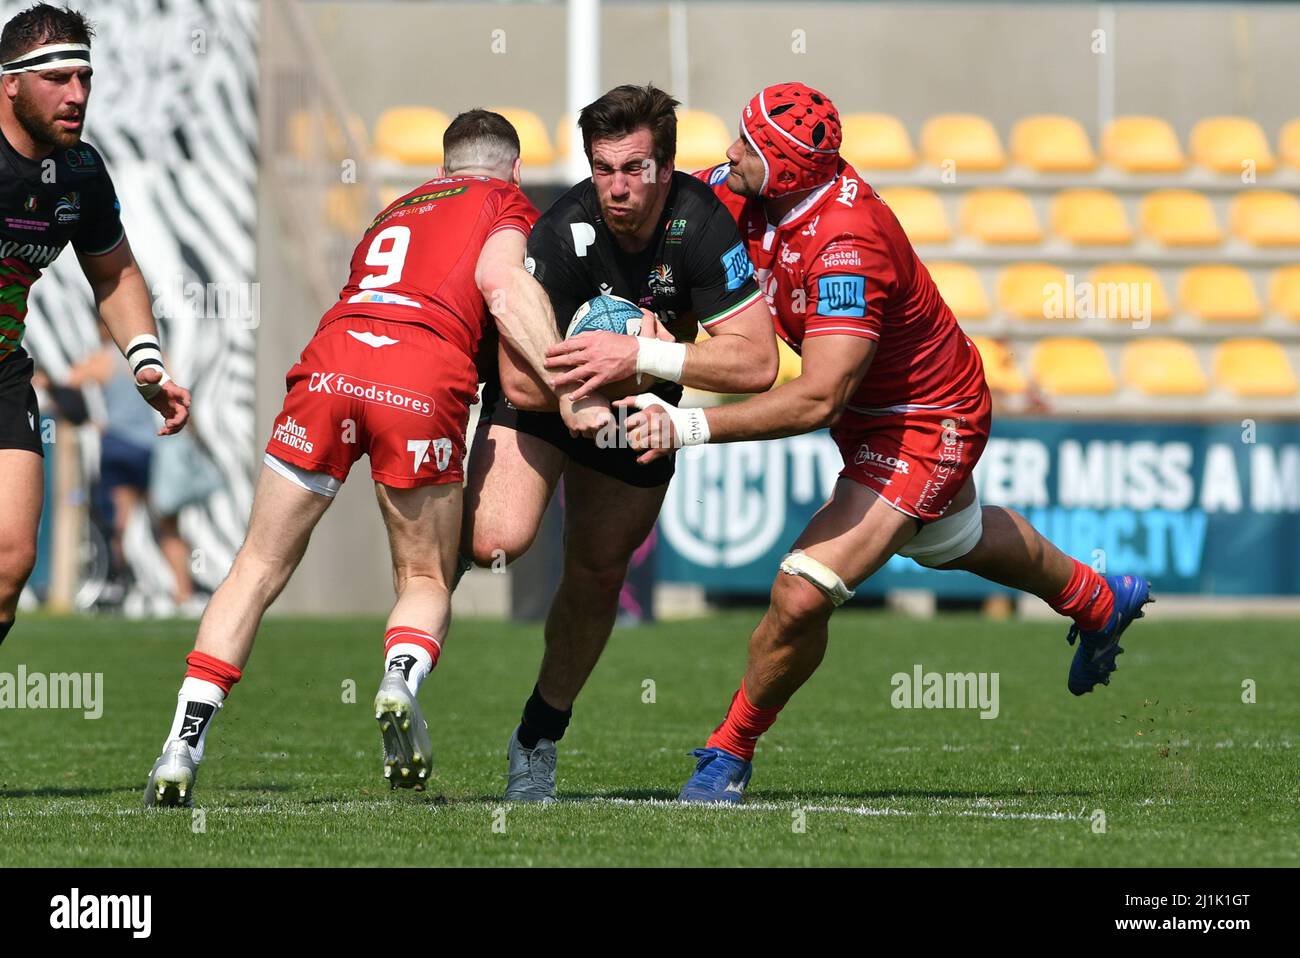 Parma, Italia. 26th Mar, 2022. enrico lucchin (Zebre) durante Zebre Rugby Club vs Scarlets, United Rugby Championship match a Parma, Italy, March 26 2022 Credit: Independent Photo Agency/Alamy Live News Foto Stock